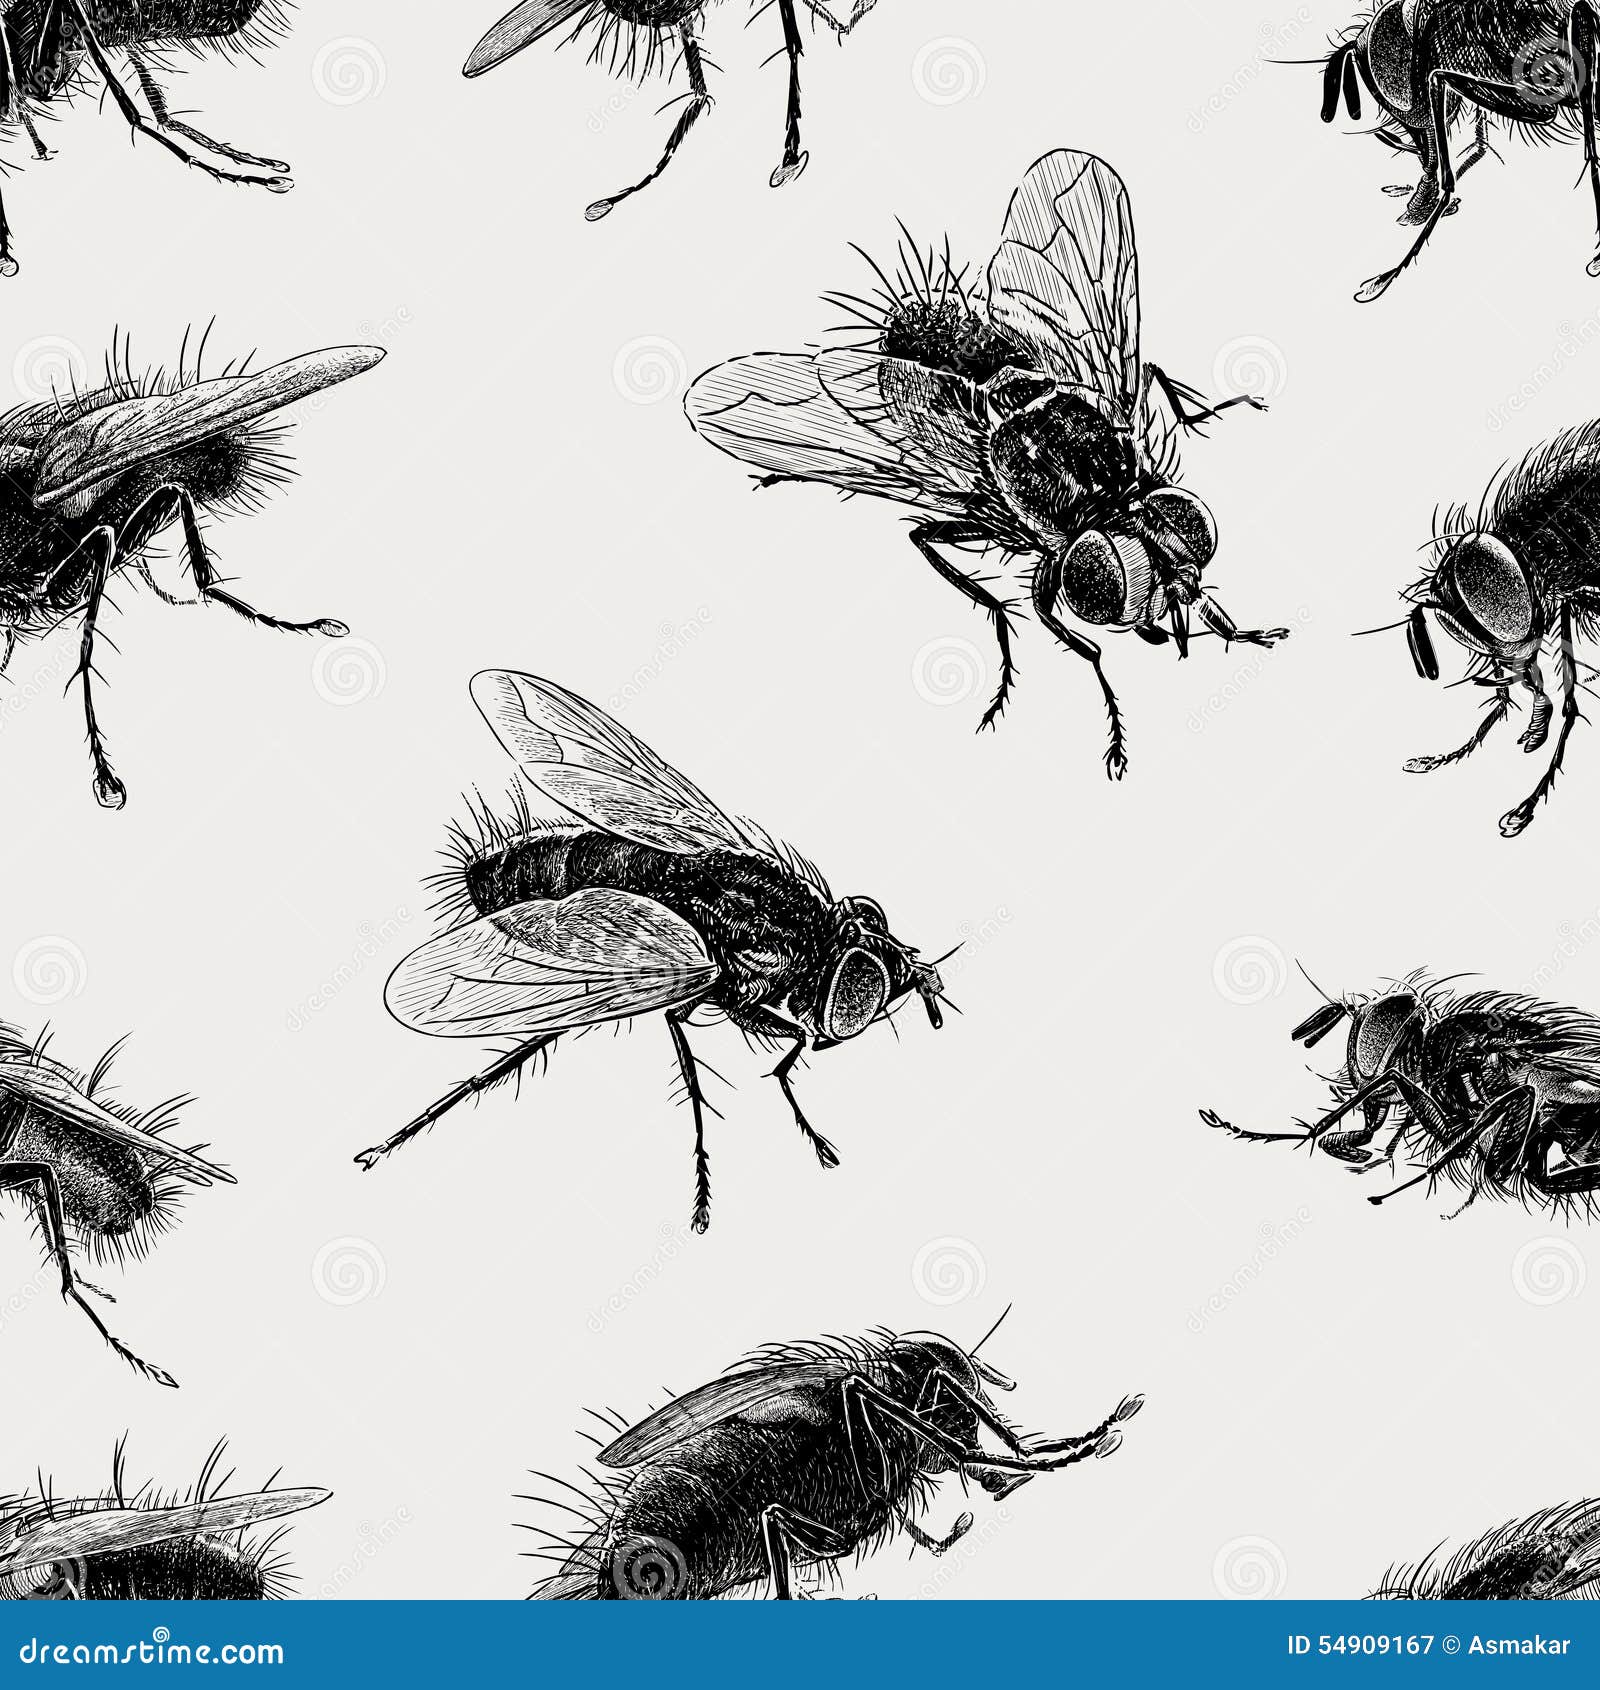 Pattern of the big flies stock vector. Illustration of pattern